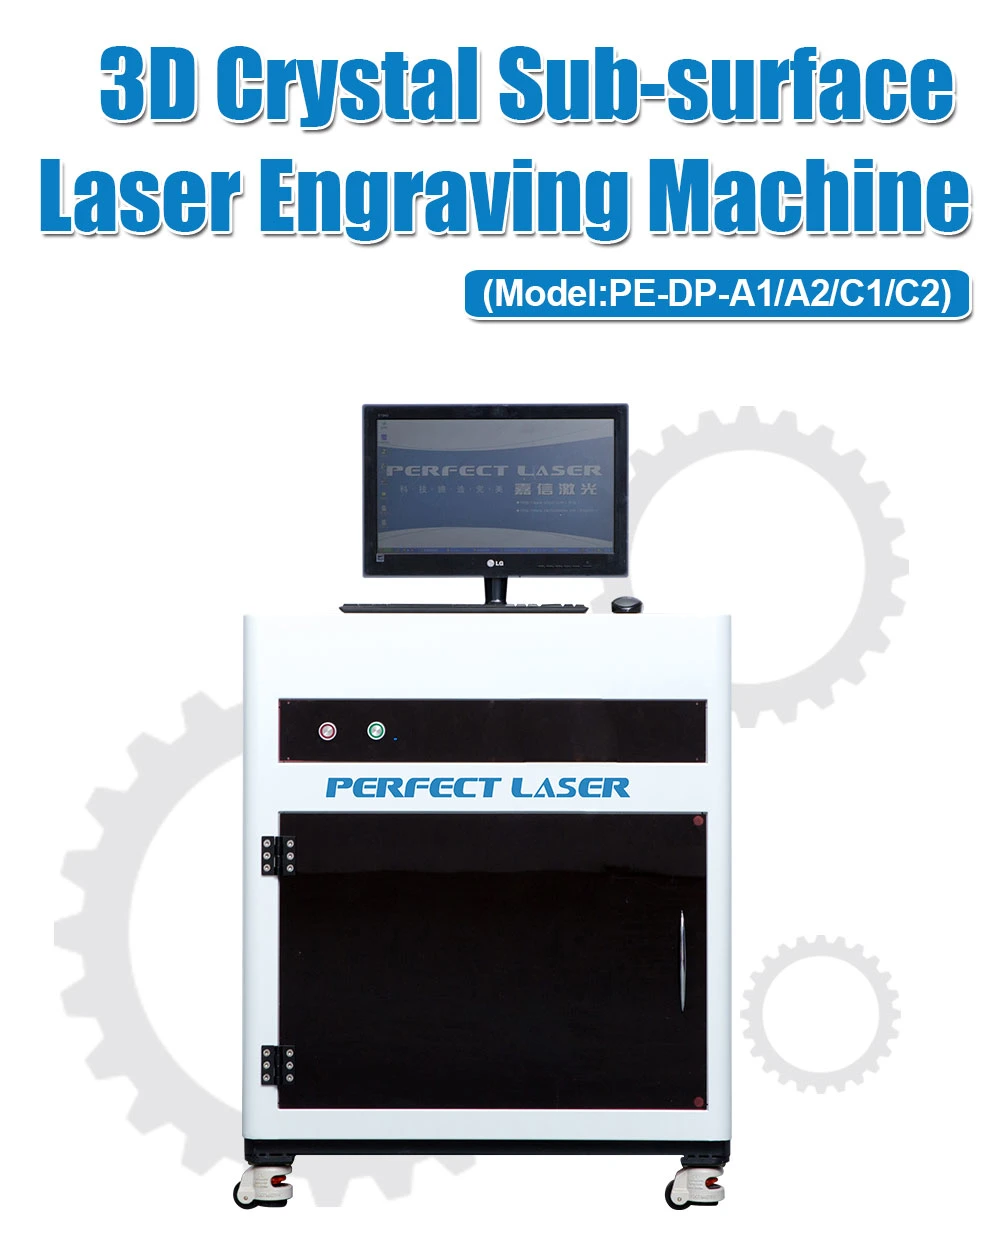 Series 3D Crystal Subsurface Glass Inside Laser Engraving Machine